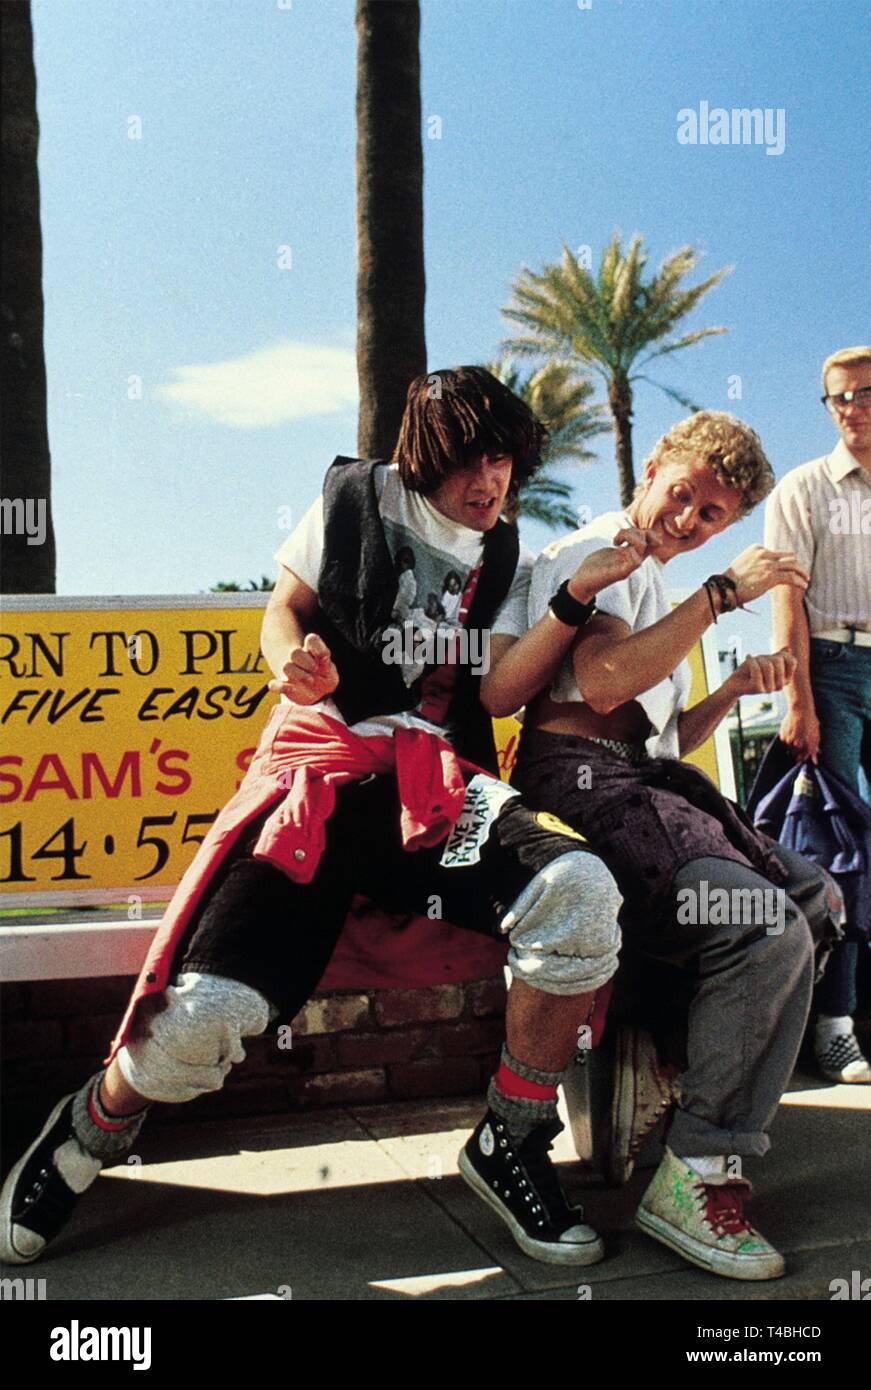 BILL AND TED'S EXCELLENT ADVENTURE (1989) KEANU REEVES ALEX WINTER STEPHEN  HEREK (DIR) ORION/MOVIESTORE COLLECTION LTD Stock Photo - Alamy